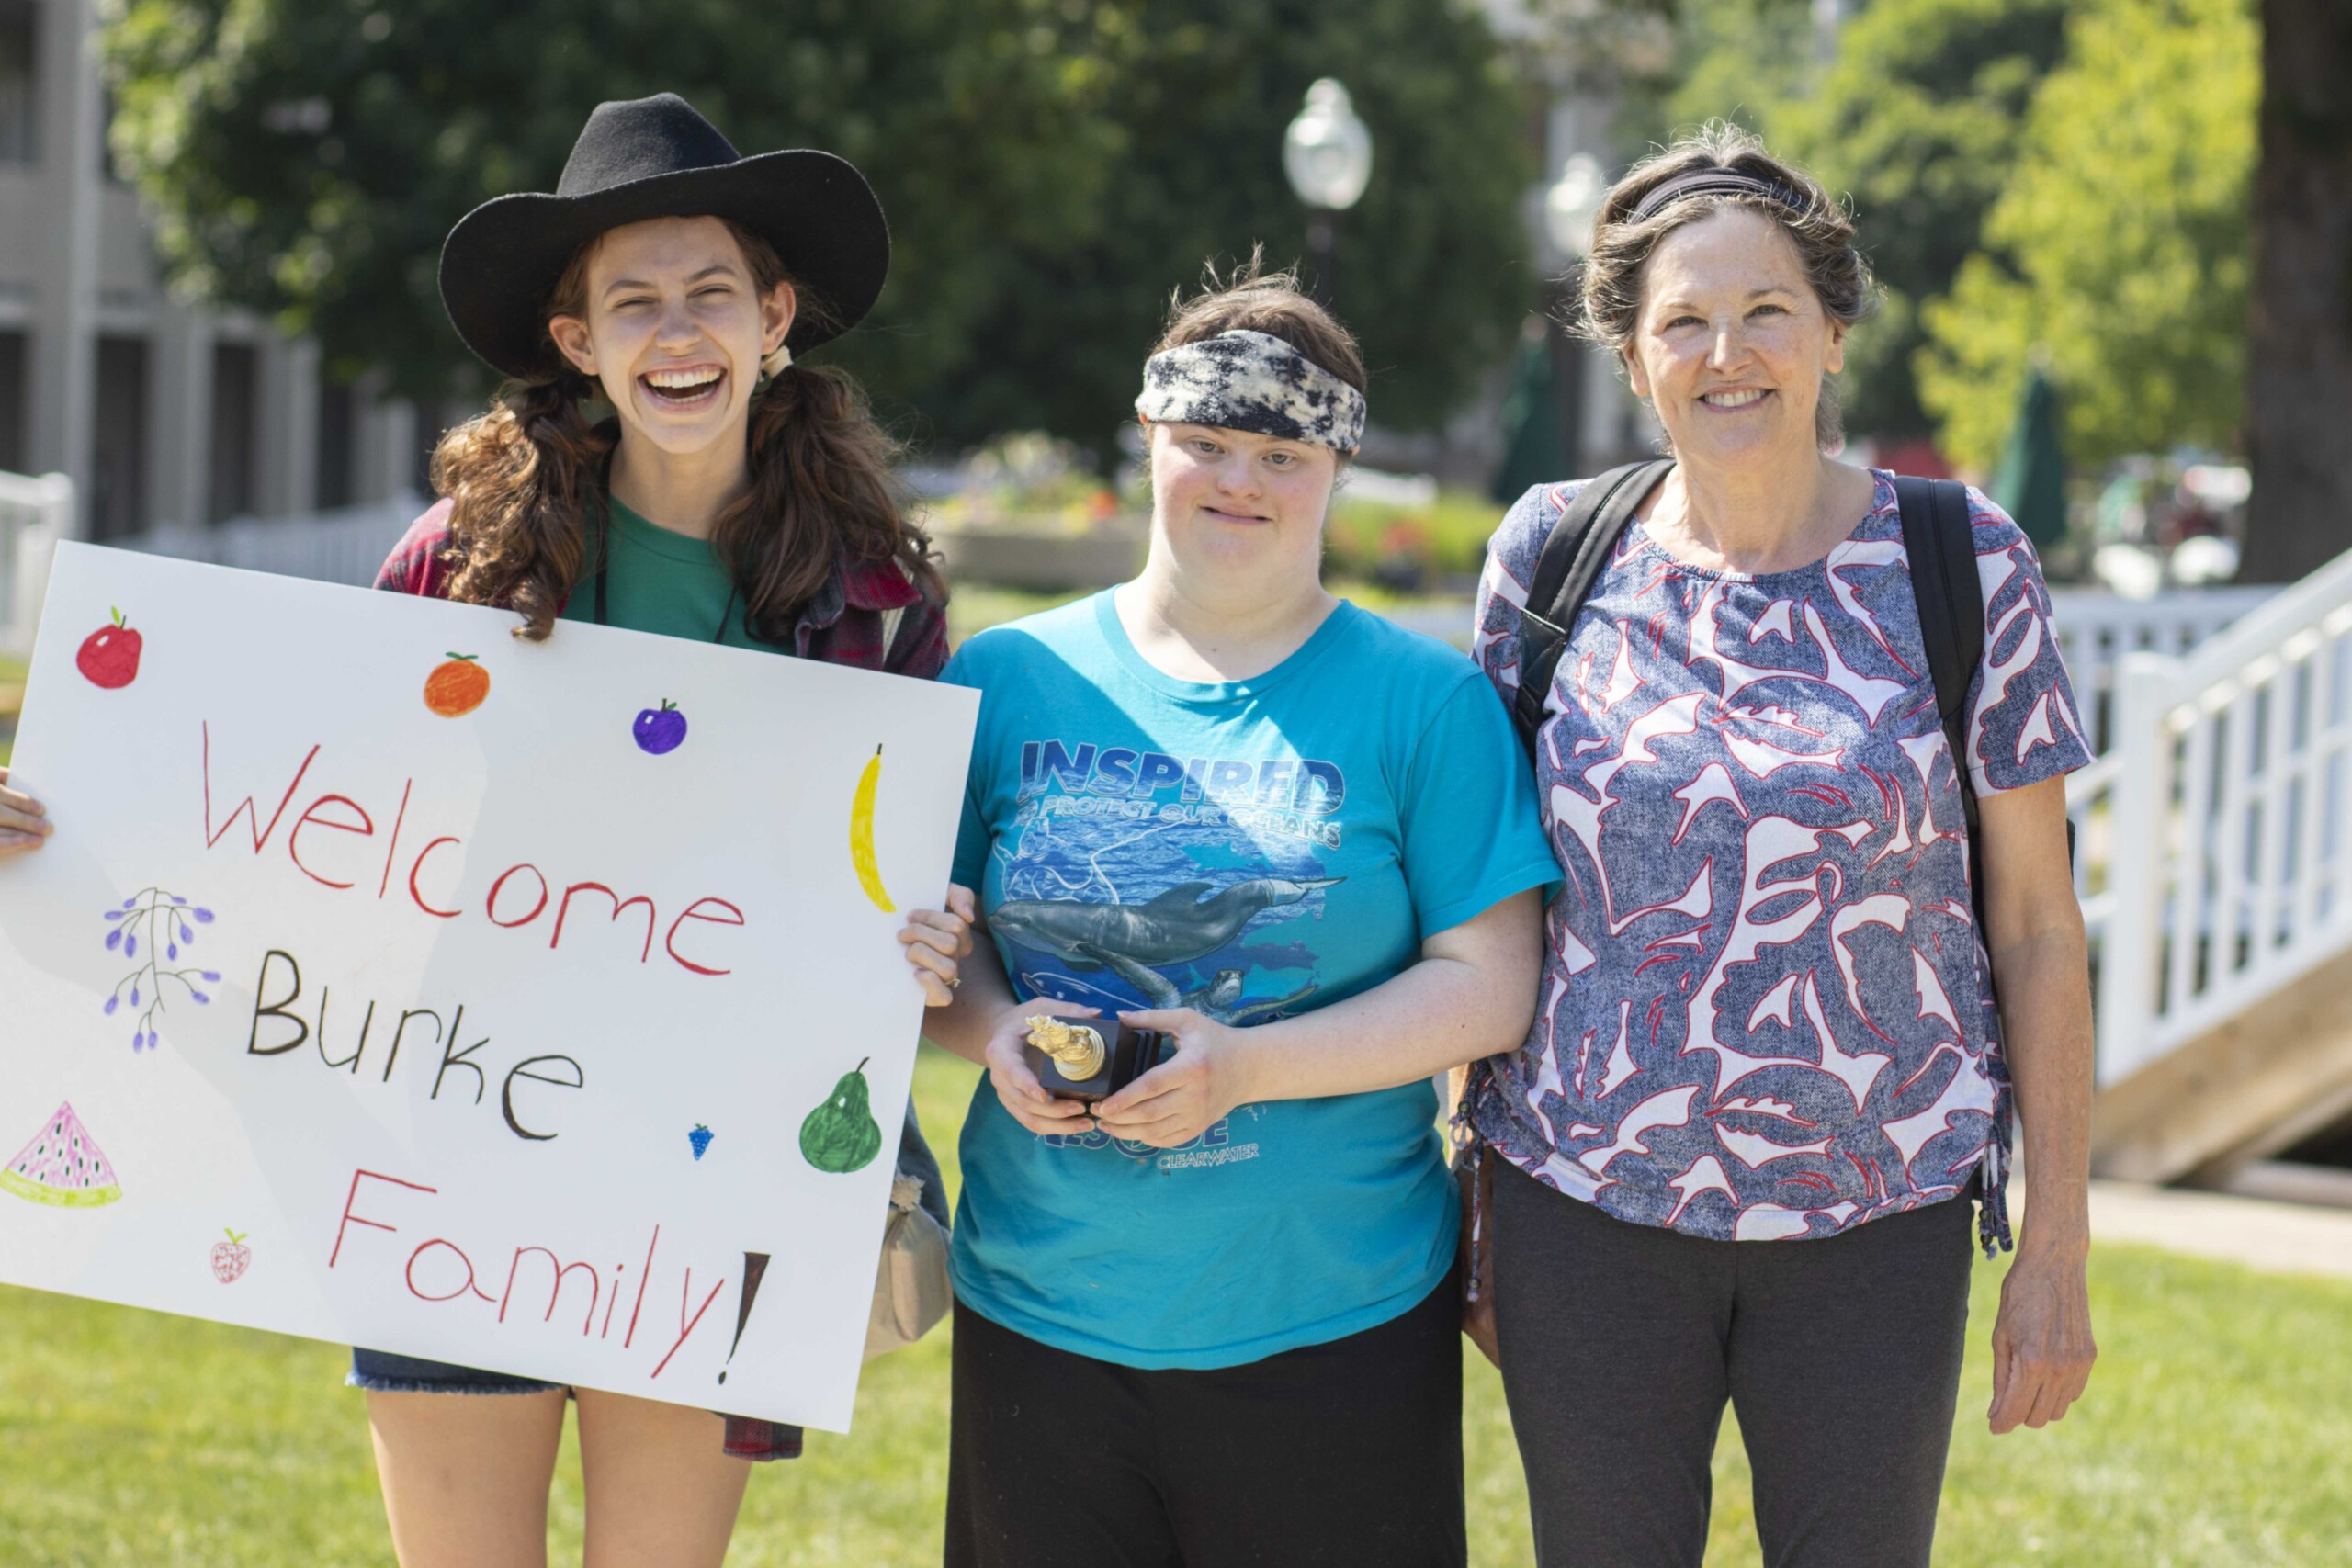 Kate holding a colorful "Welcome Burke Family" sign. Randi and Pat standing beside her, all three smiling at the camera.